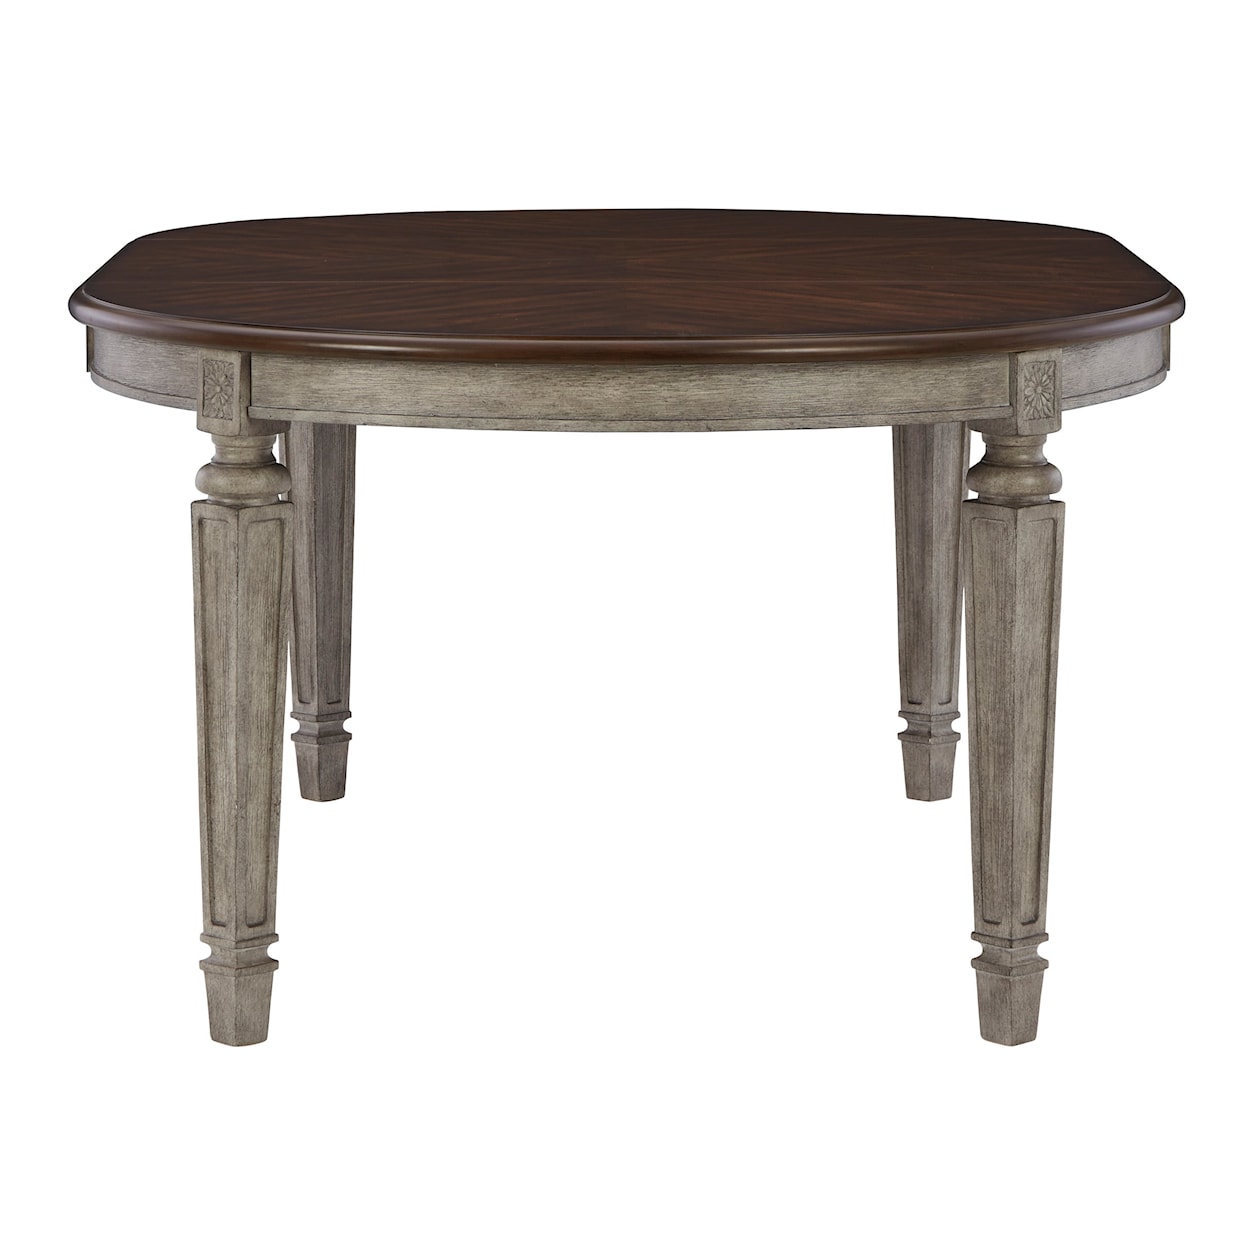 Benchcraft Lodenbay Dining Table